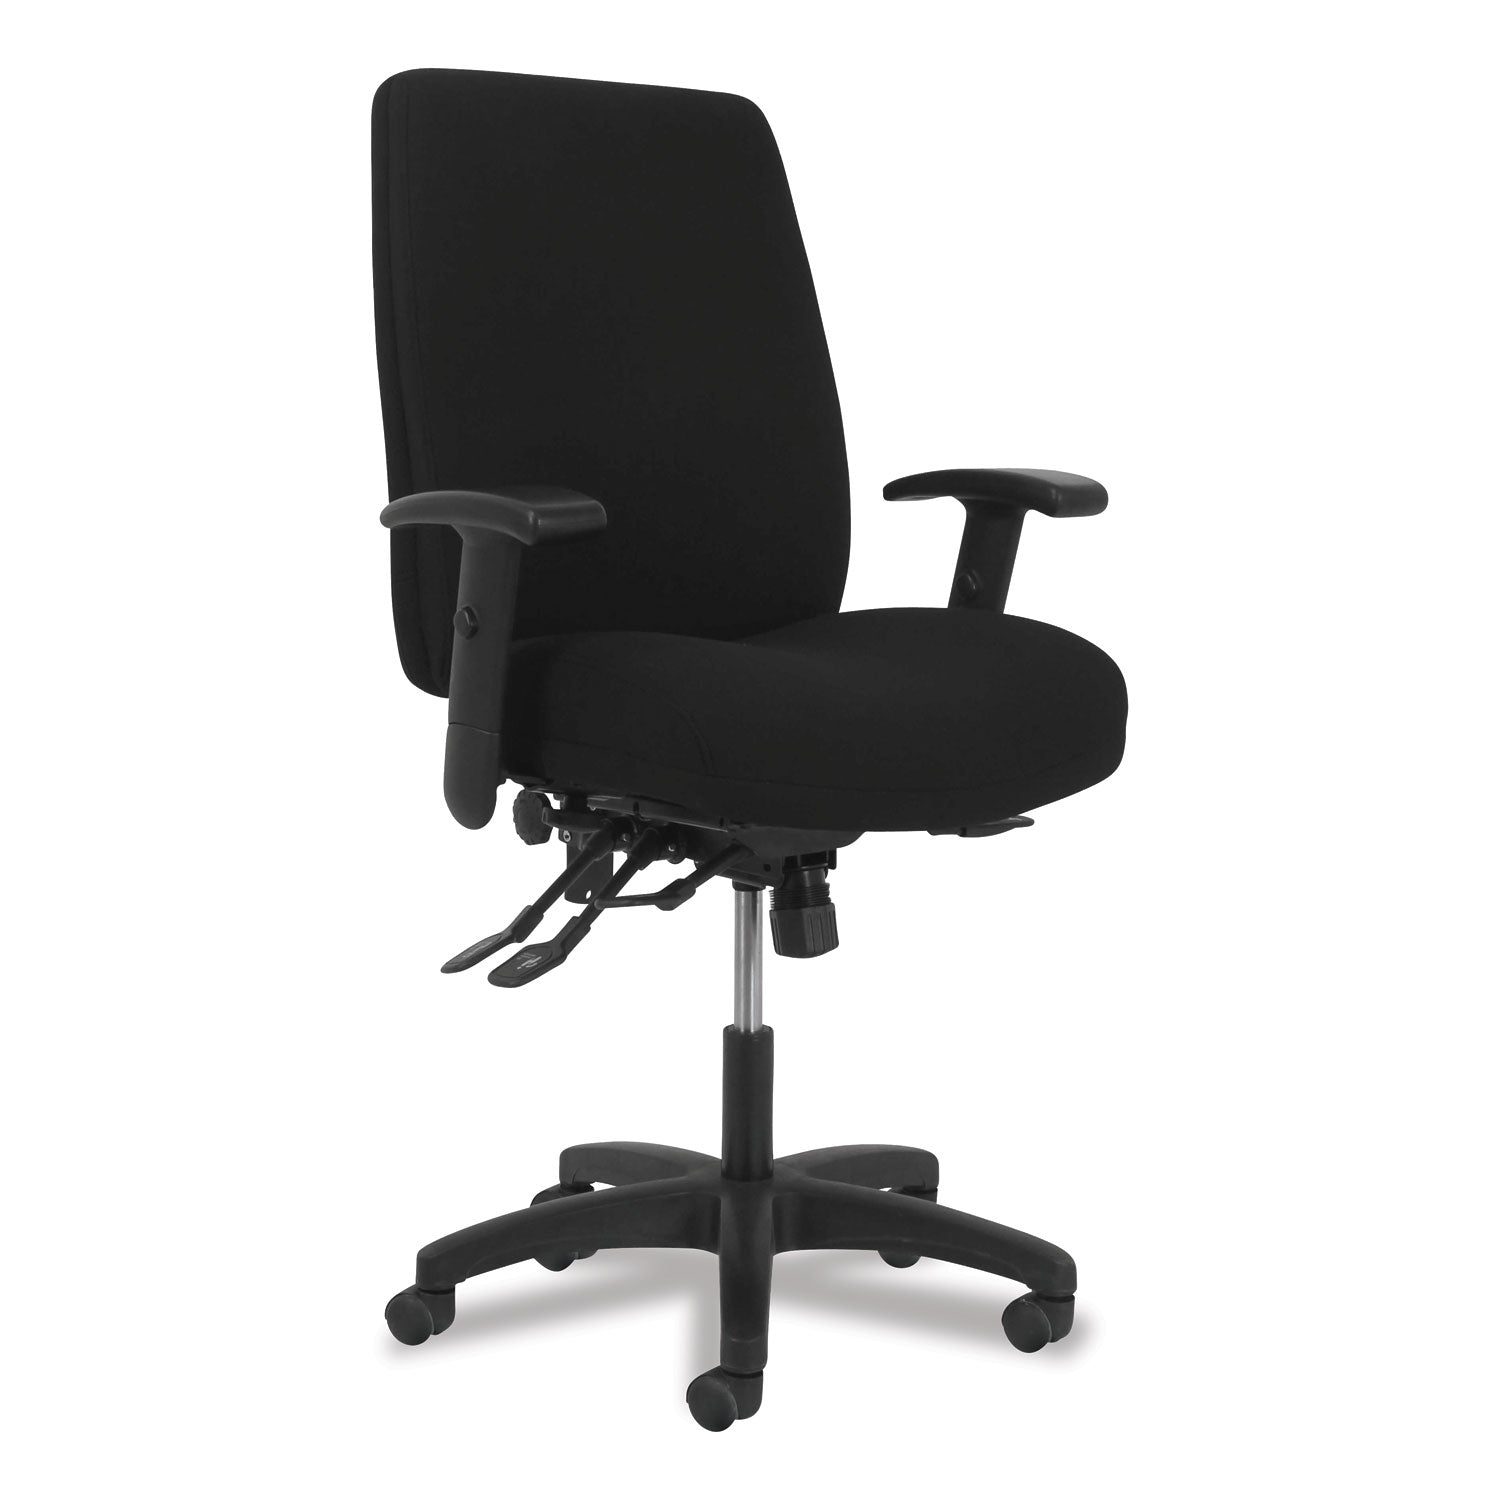 network-high-back-chair-supports-up-to-250-lb-183-to-228-seat-height-black_honvl283a2va10t - 1